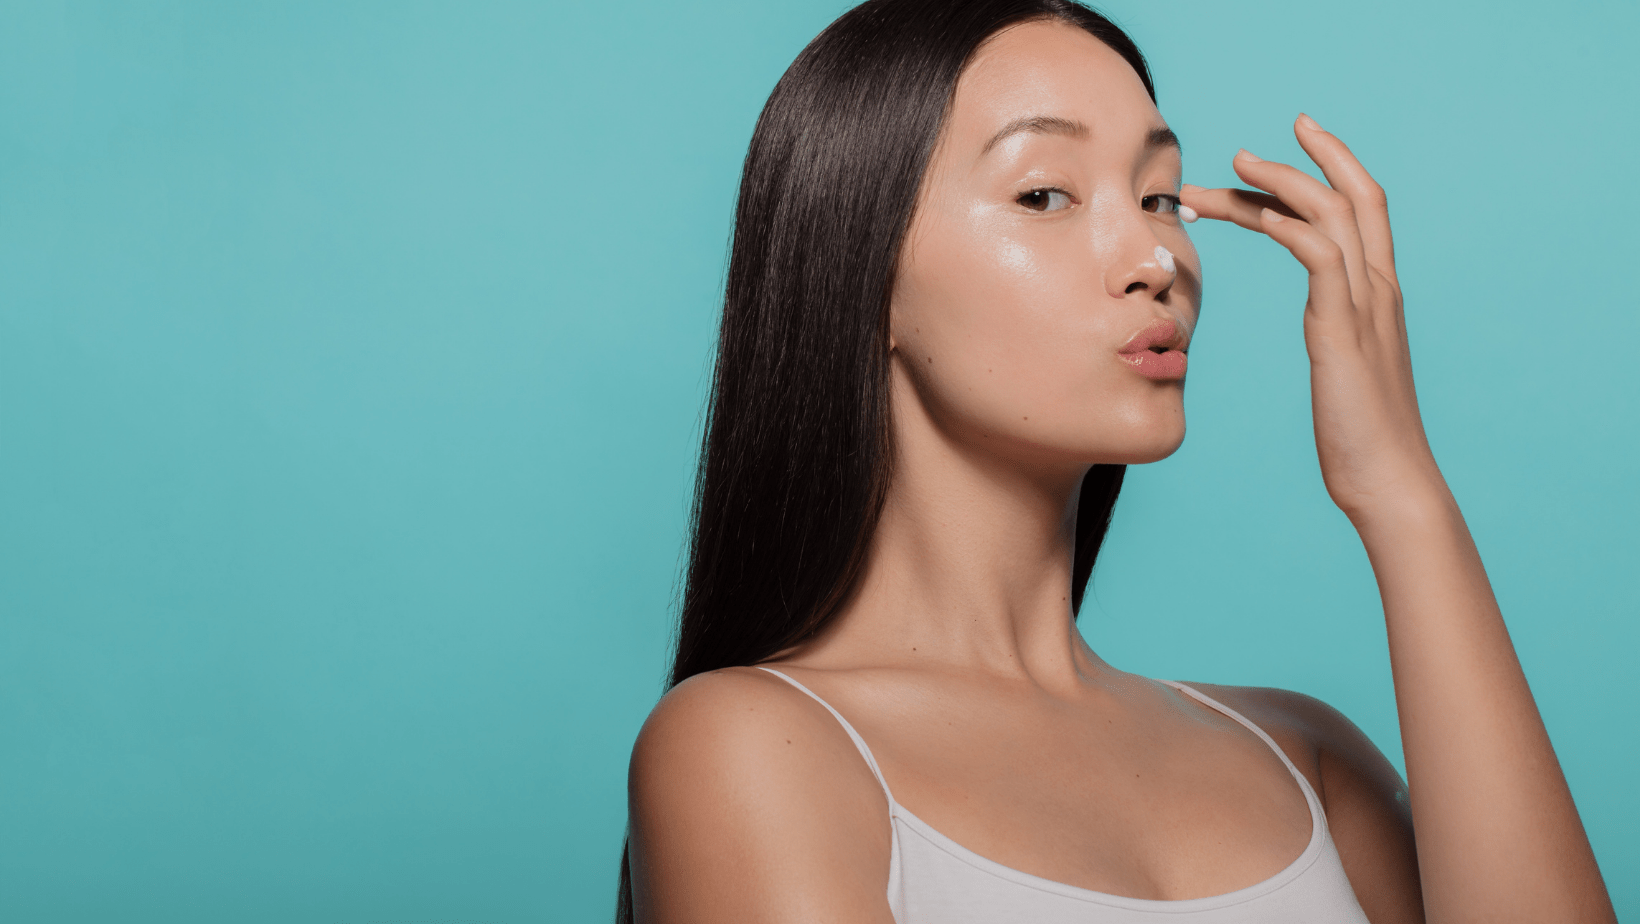 What to Look for in Your Skin Care Products